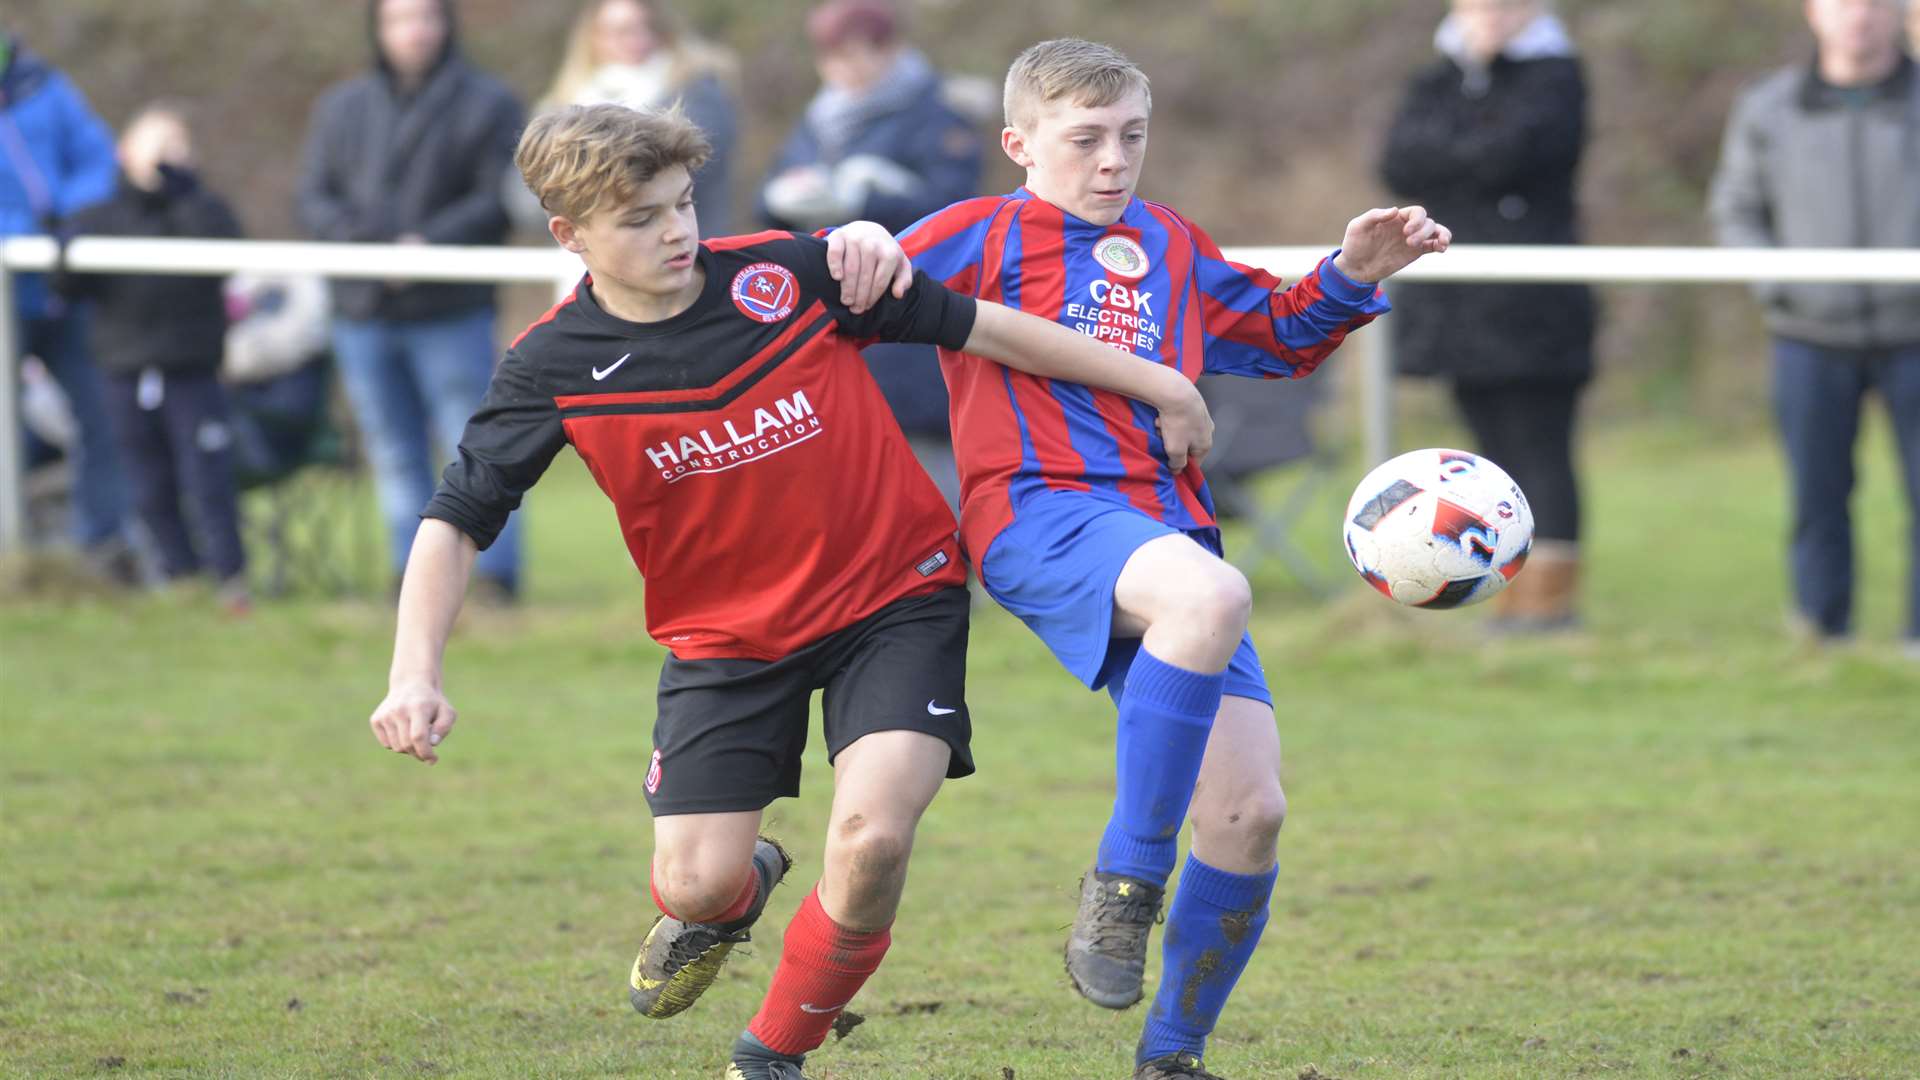 Hempstead Valley under-14s (red) take on Woodpecker HI United in the League Cup Picture: Ruth Cuerden